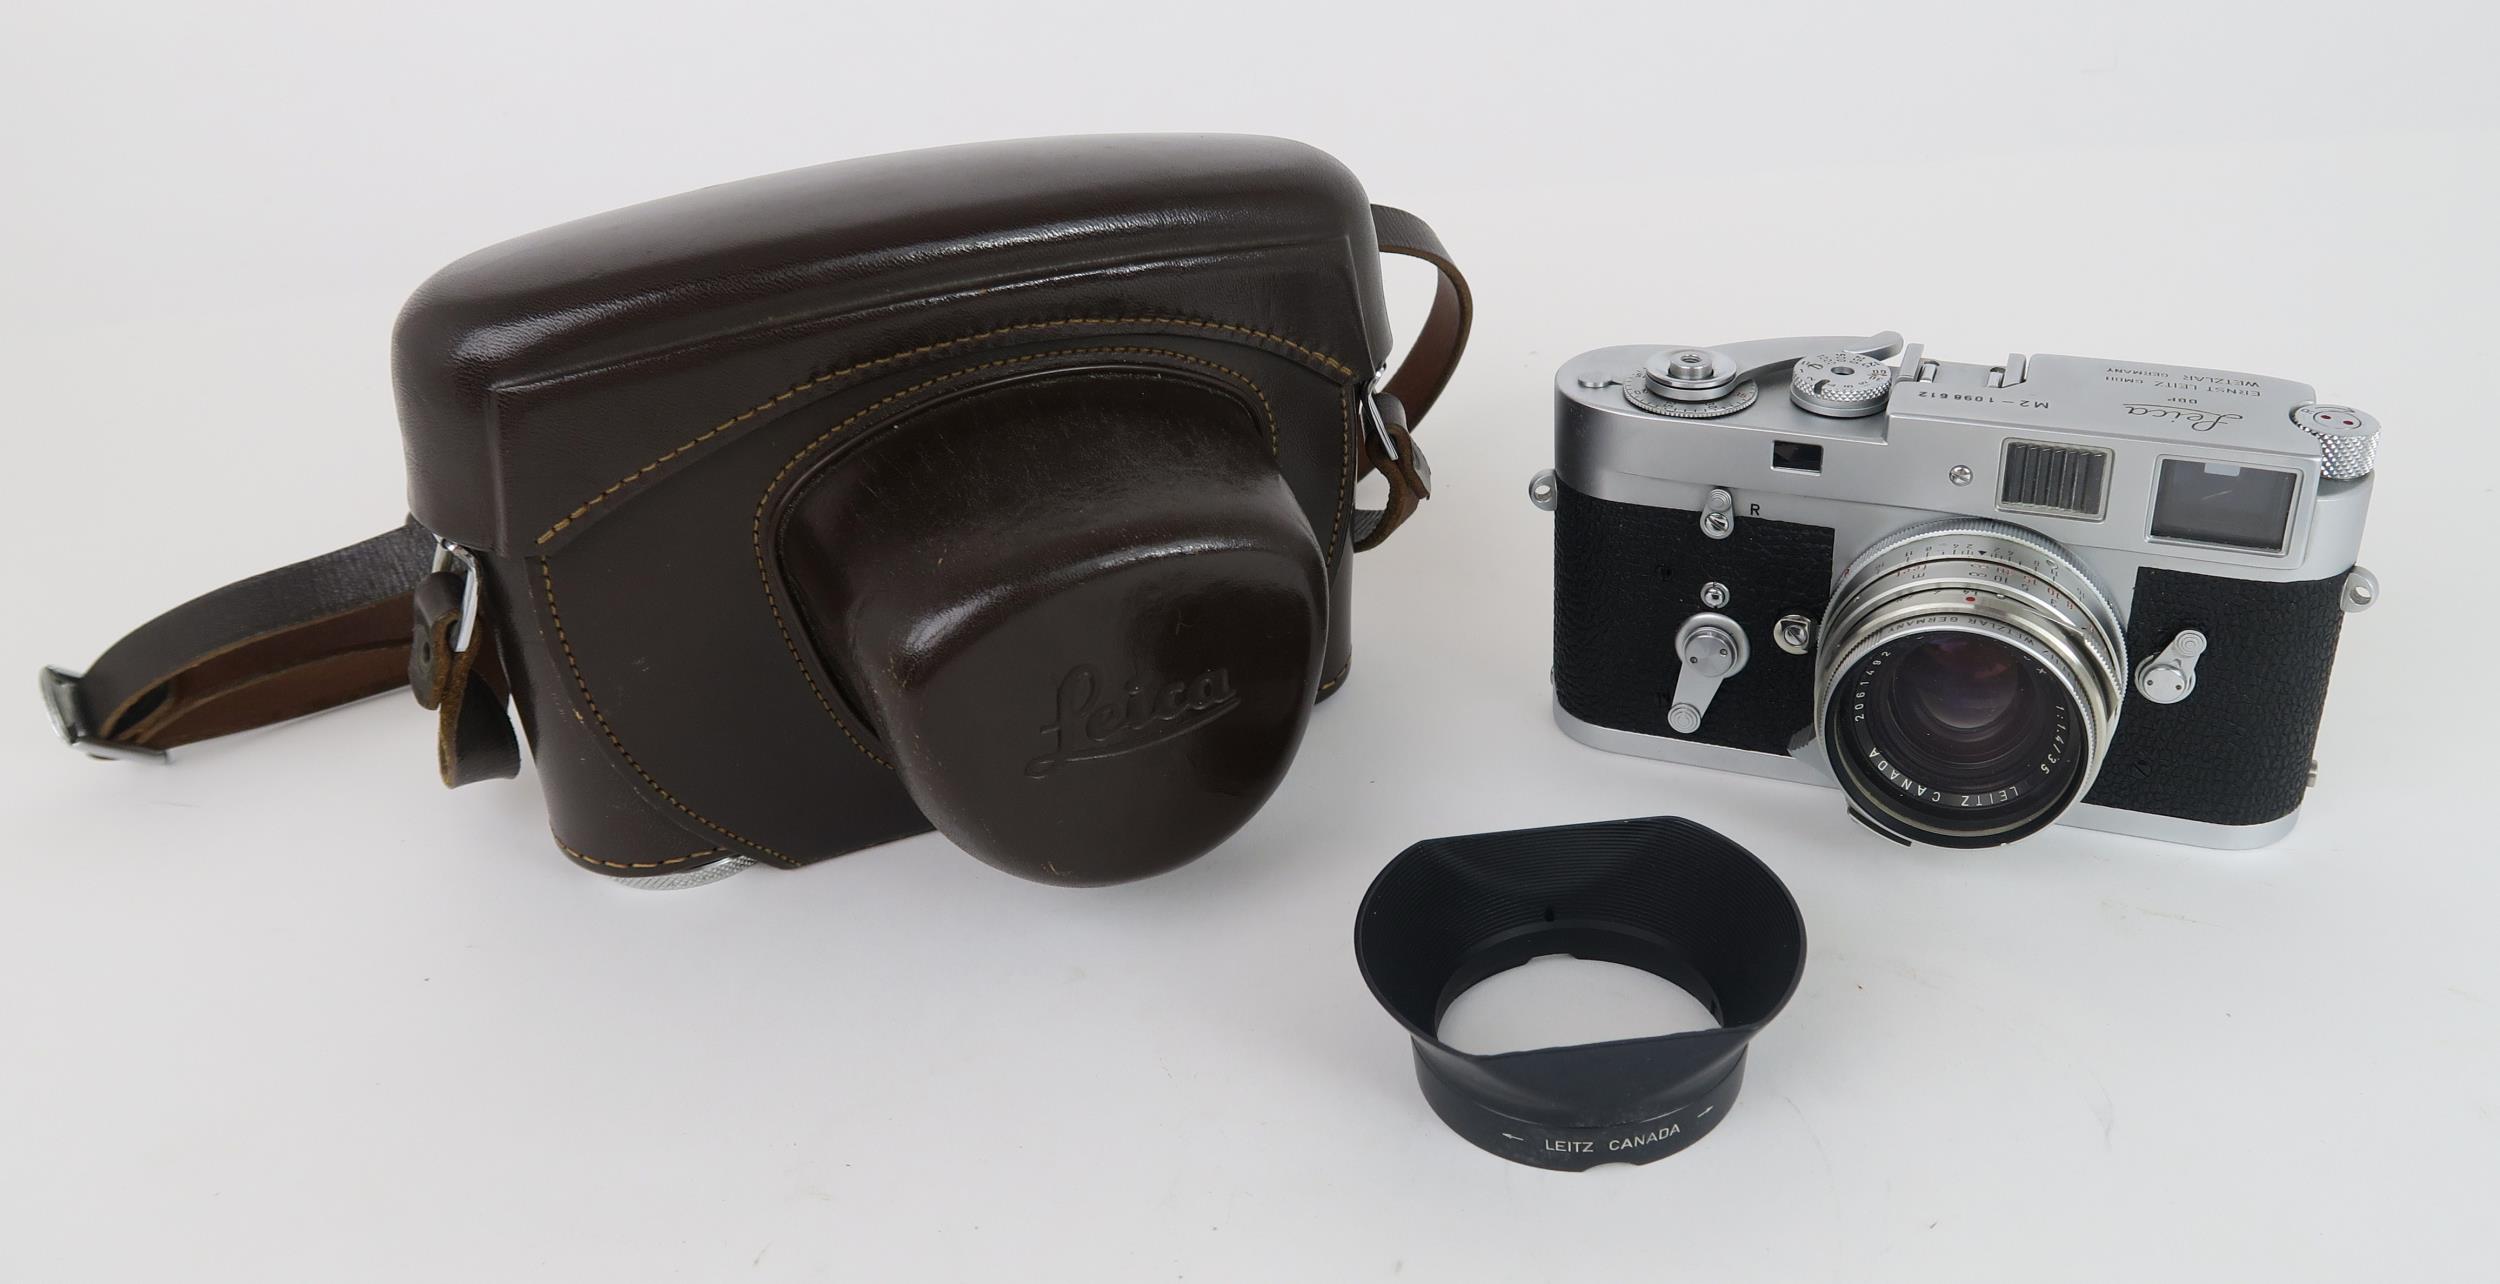 A 1964 LEITZ LEICA M2 RANGEFINDER CAMERA FITTED WITH A LEITZ SUMMILUX 1:1.4/35 LENS Serial no. - Image 2 of 4